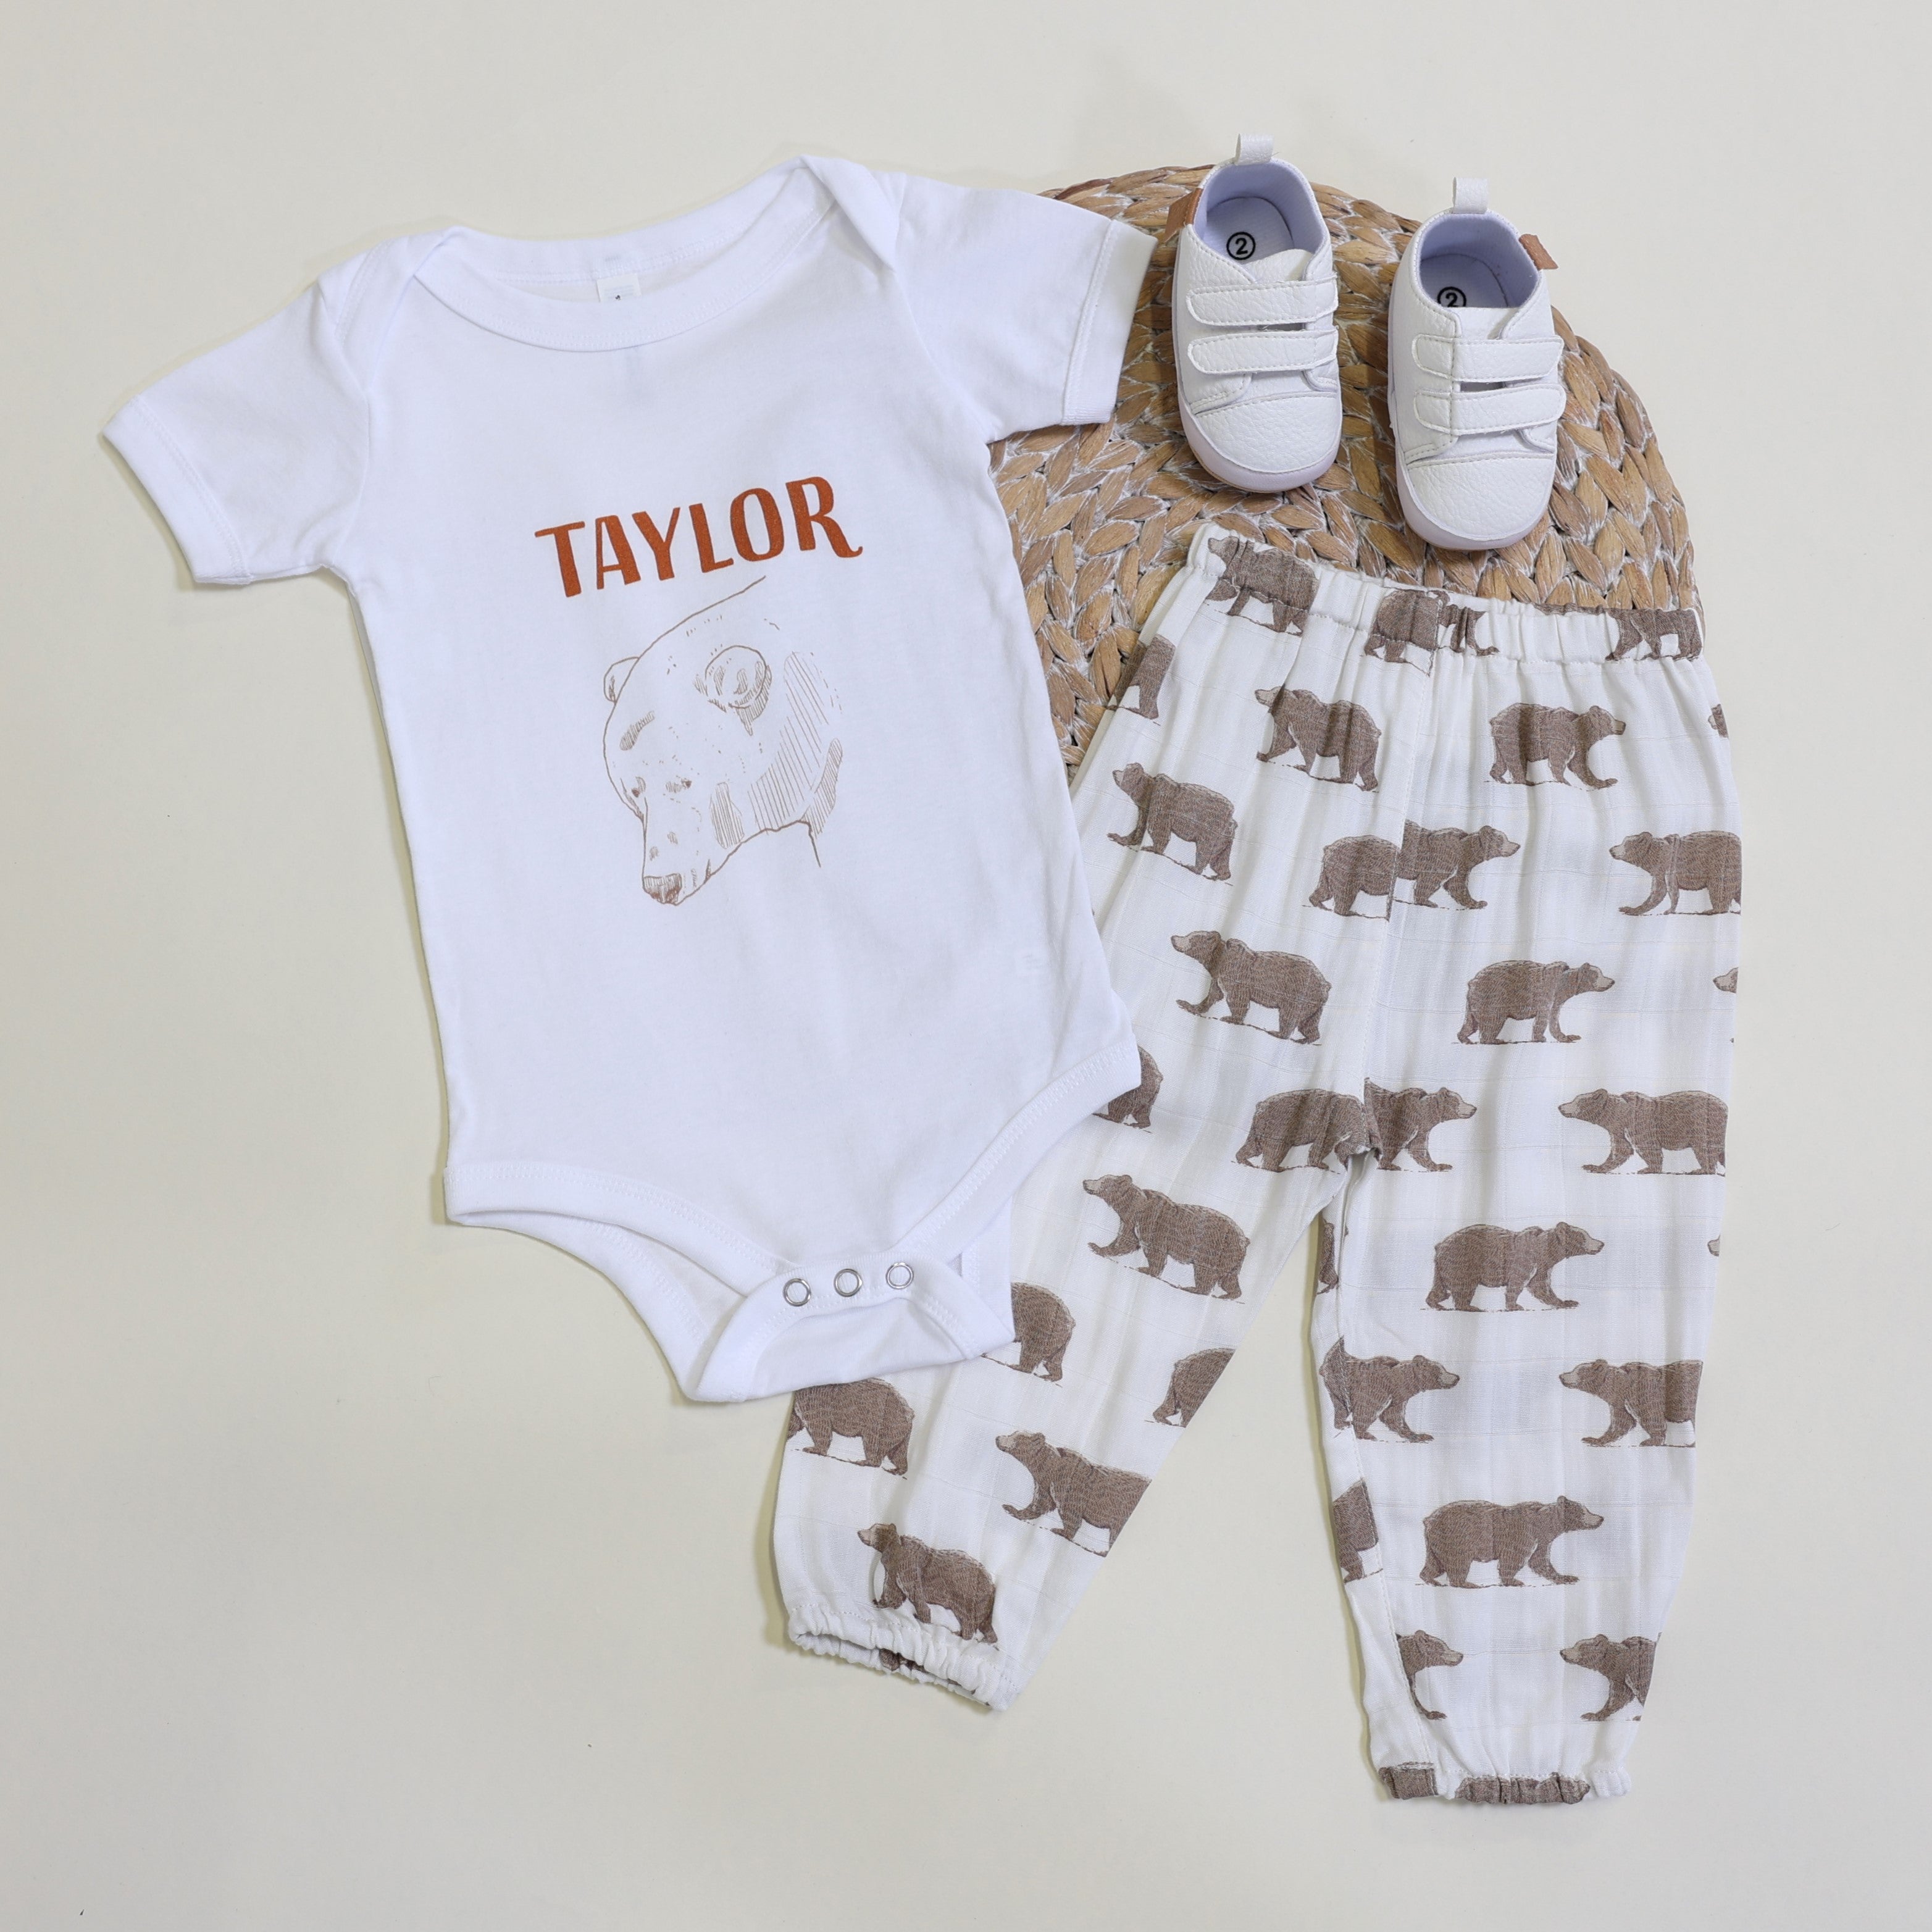 personalized baby onesie and matching pants with bear design